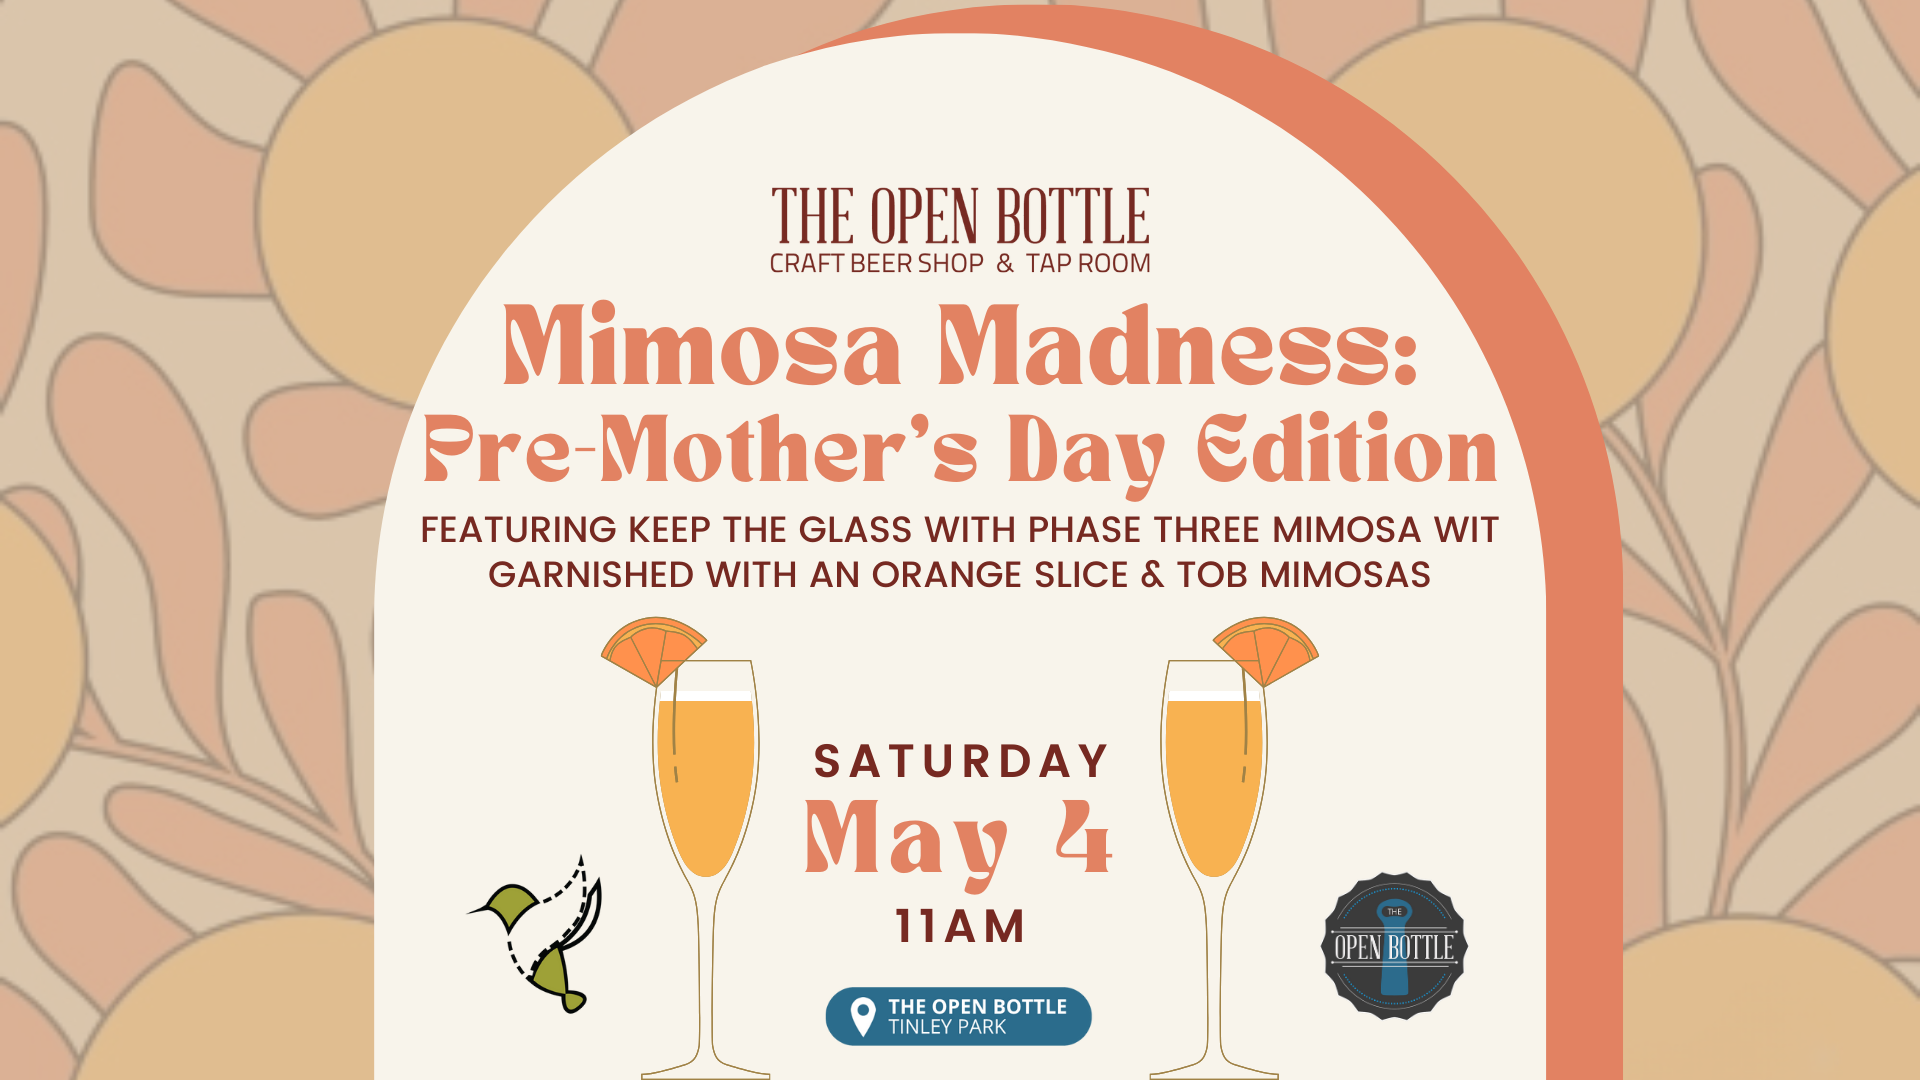 Event: Mimosa Madness: Pre-Mother’s Day Edition